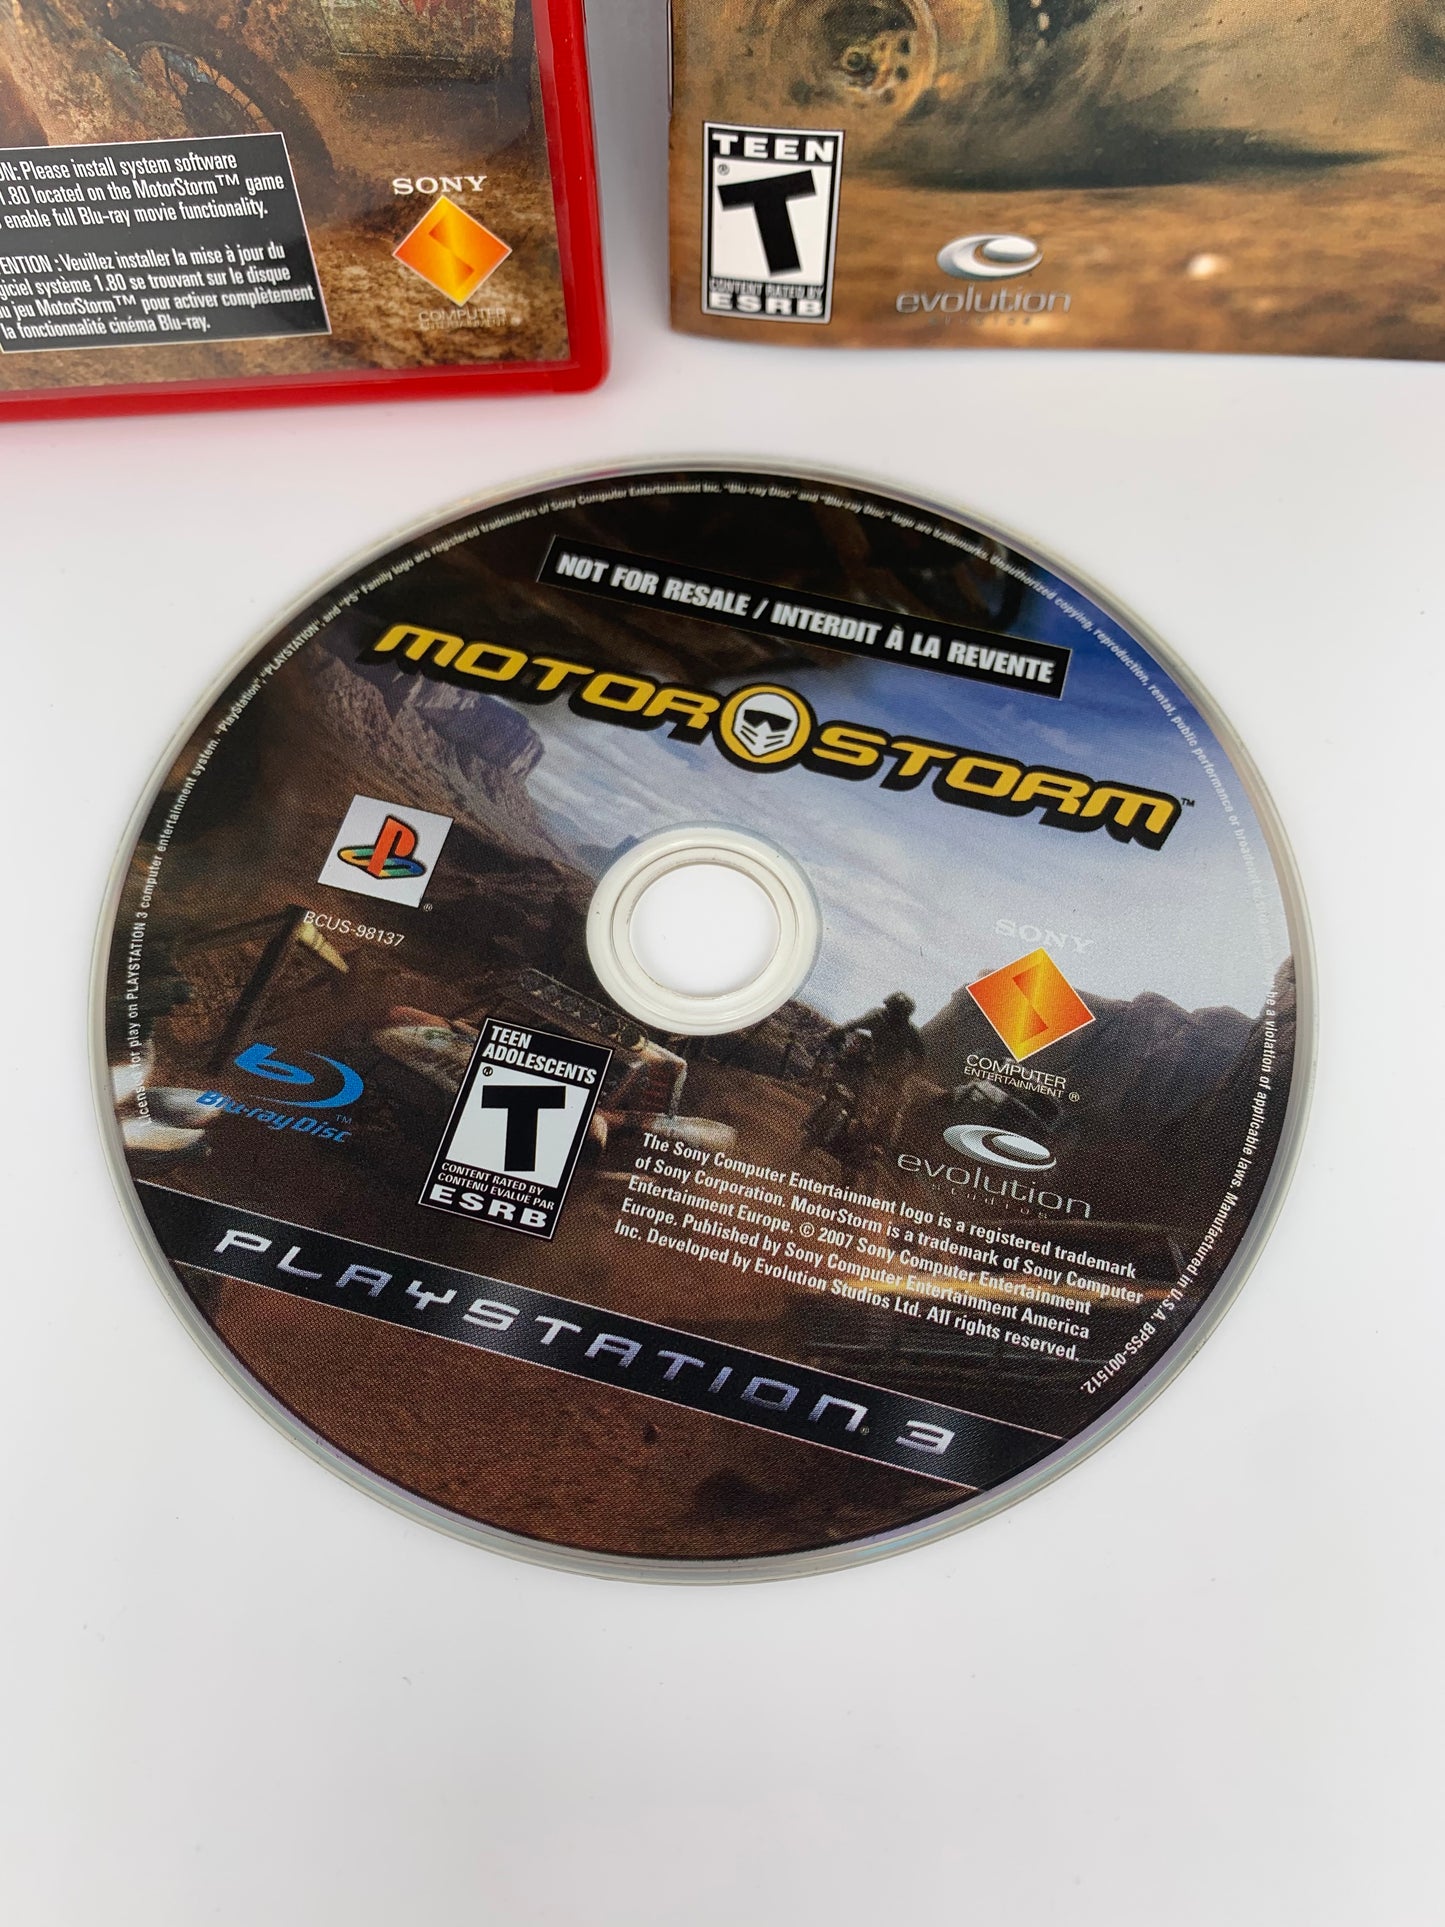 SONY PLAYSTATiON 3 [PS3] | MOTORSTORM | NOT FOR RESALE